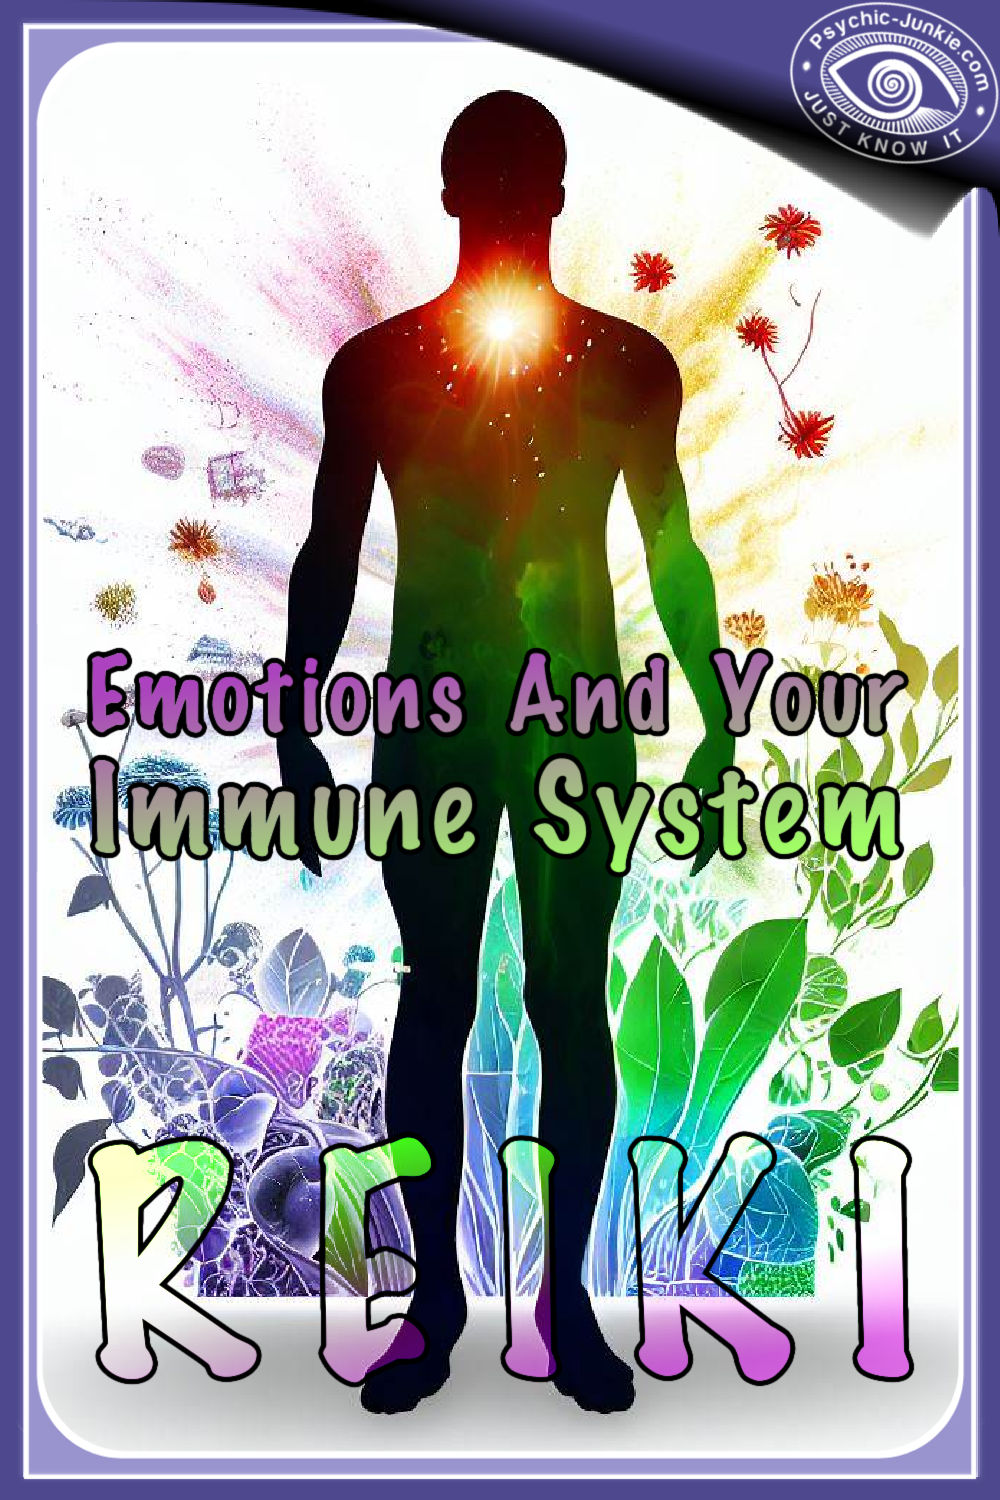 The Healing Connection: Emotions, Immunity, and the Power of Reiki